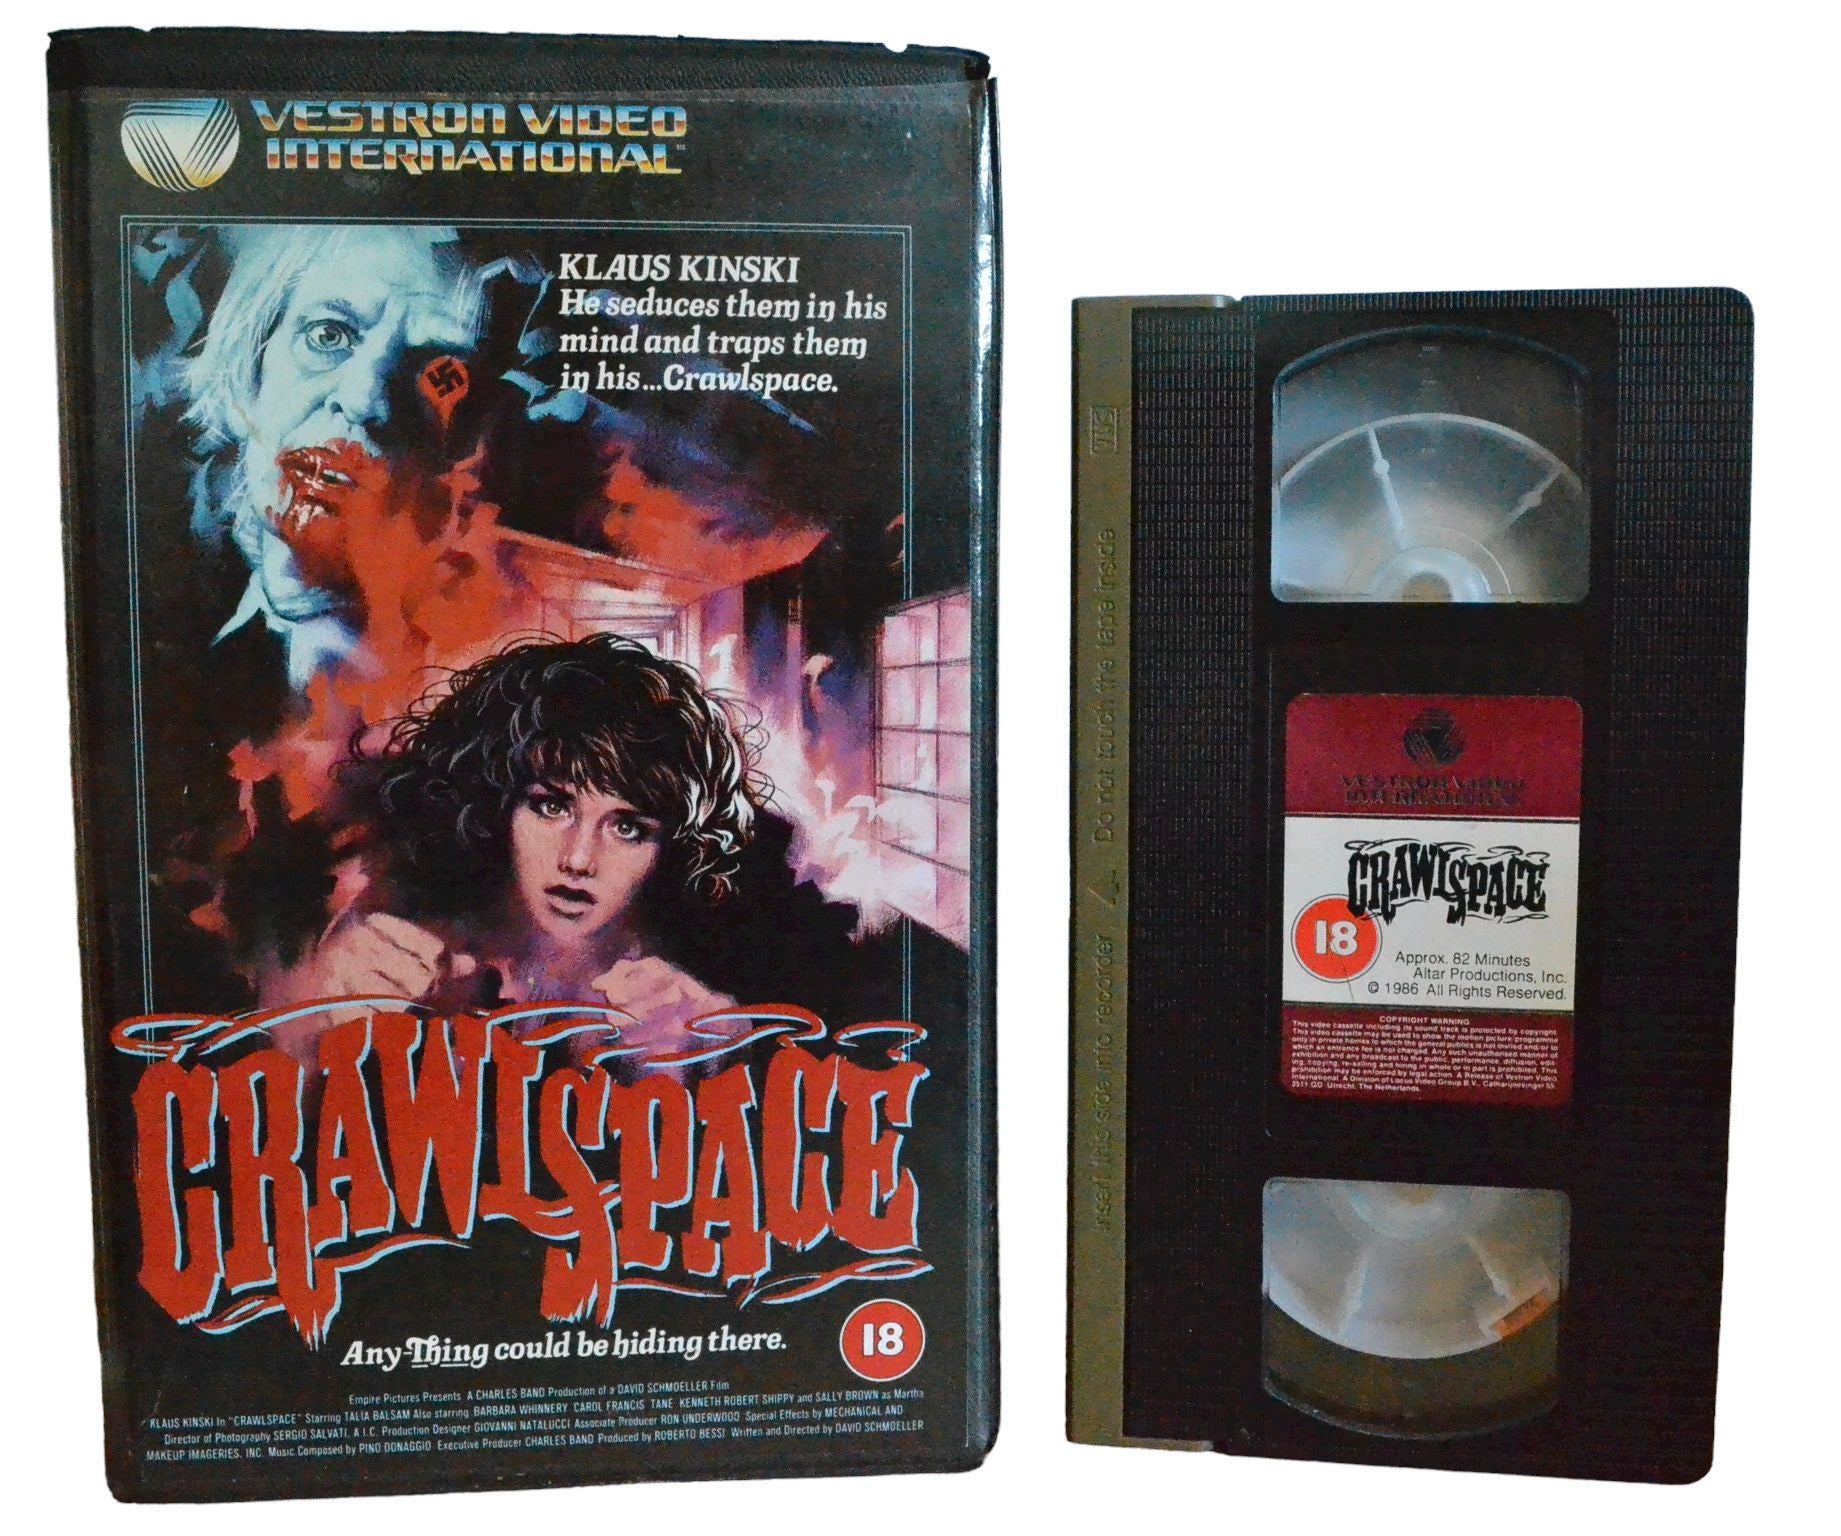 Crawlspace (Any Thing Could Be Hiding There.) - Klaus Kinski - Vestron VIdeo International - Large Box - PAL - VHS [cut sleeve]-